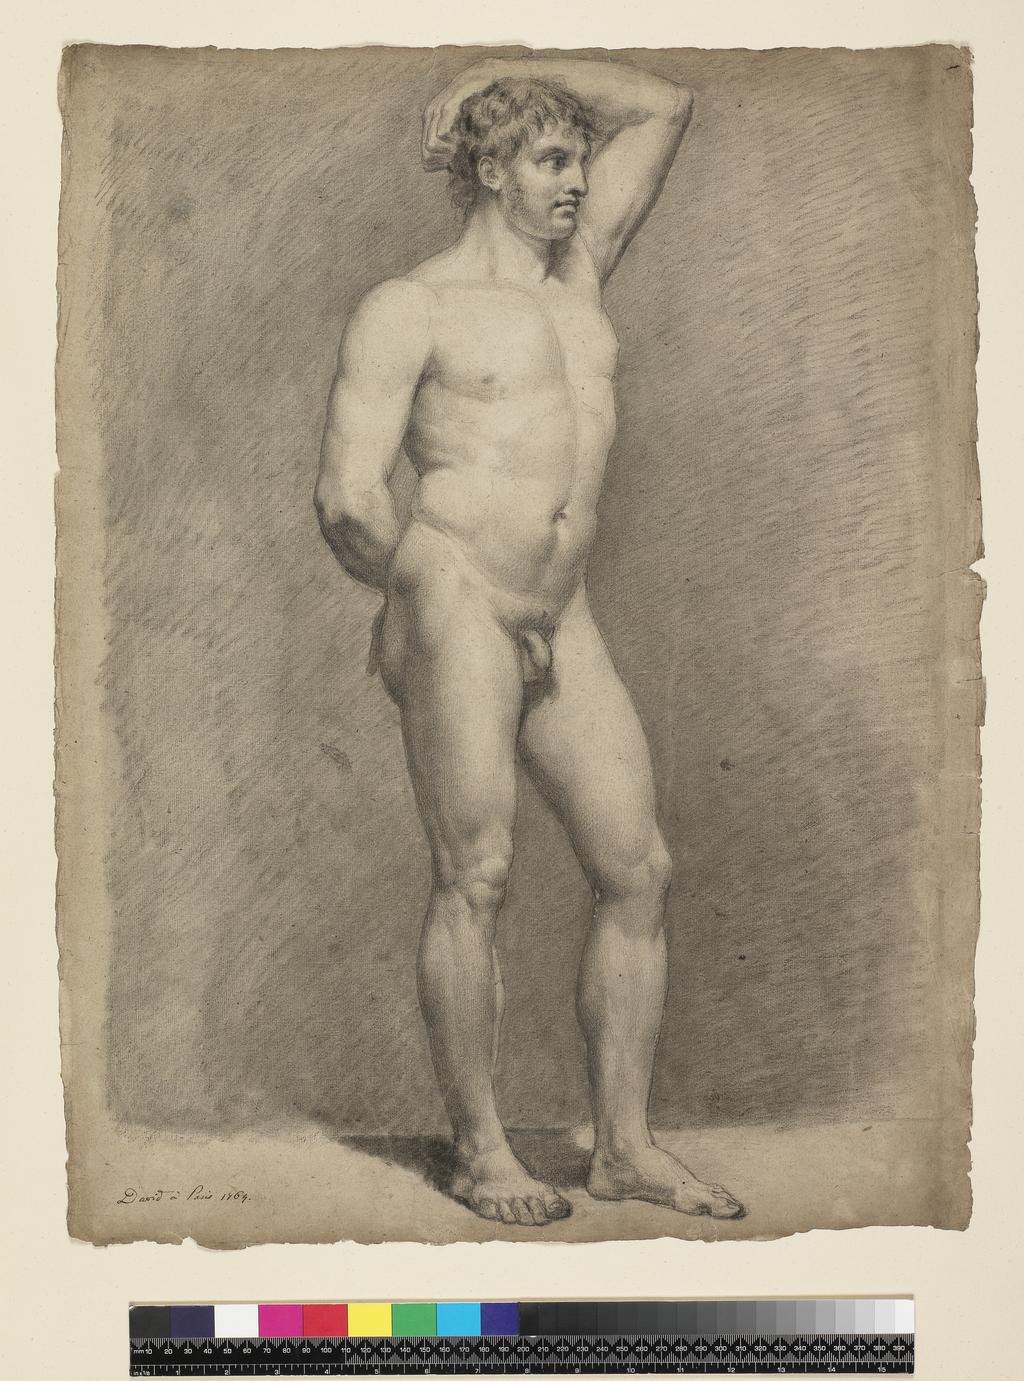 An image of An academy study of a male nude. David, Jacques-Louis, attributed to (French, 1748-1825). Black chalk on off-white paper, laid down, height, paper, 610 mm, width, paper, 470 mm, 1764.